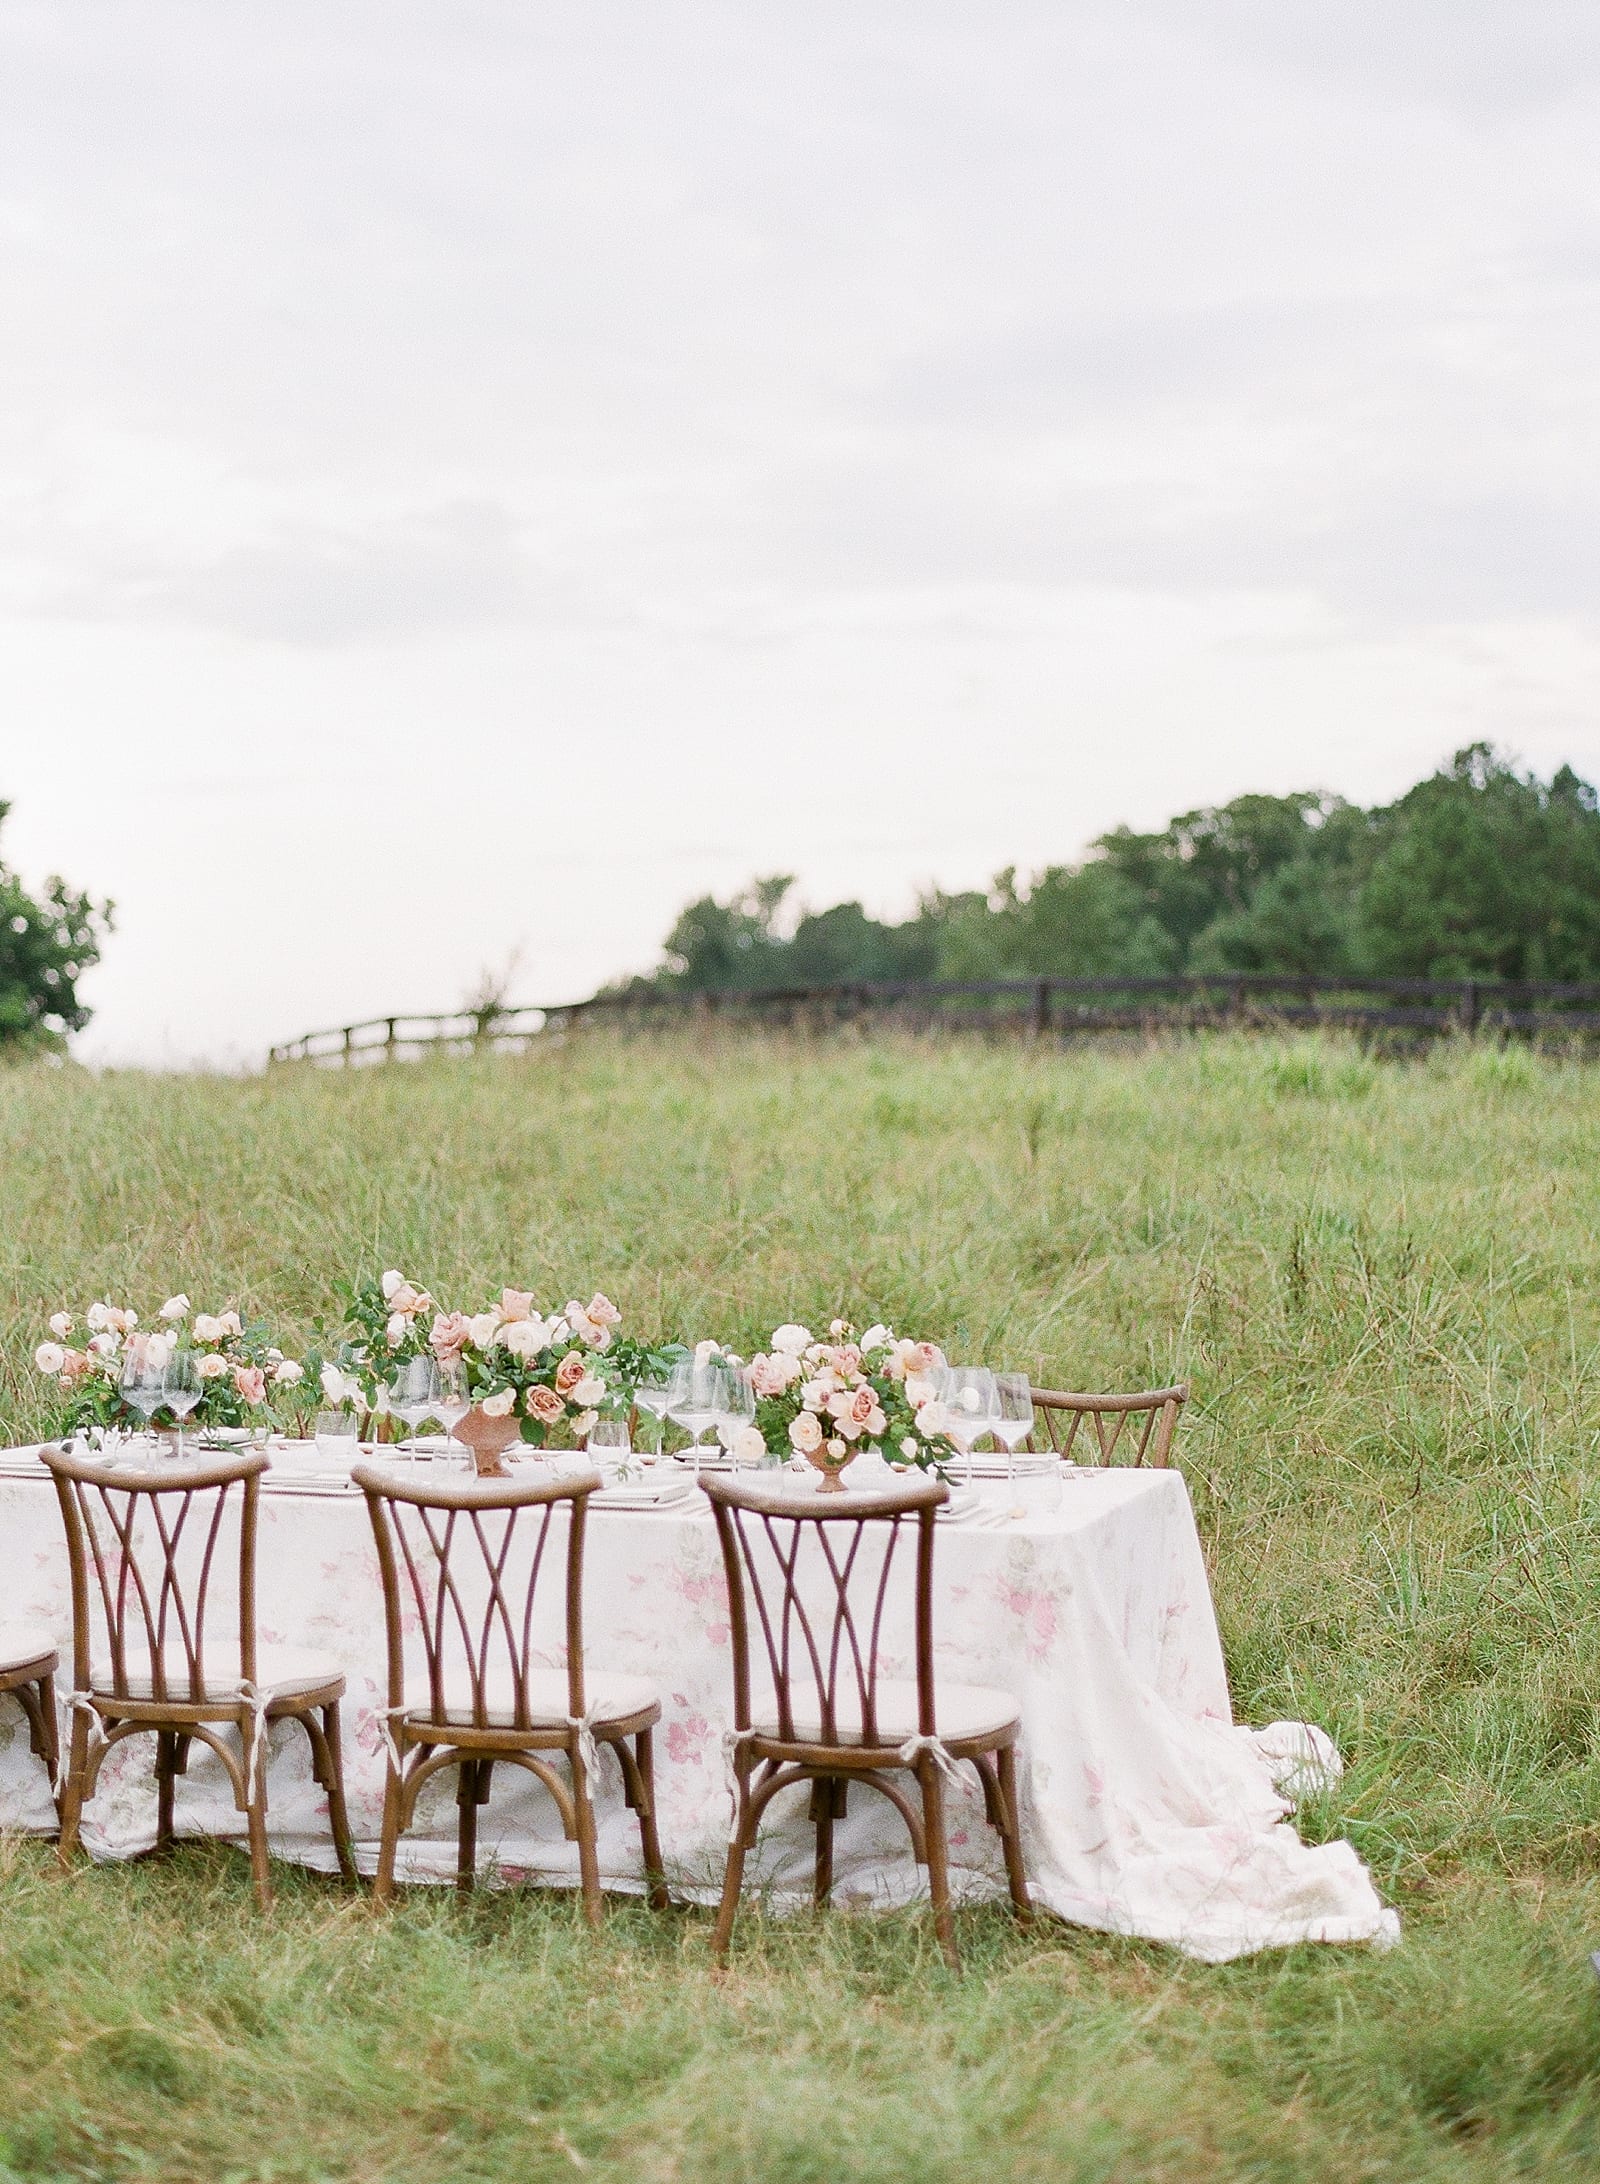 Wedding Reception Table in Field at Serenbe GA Photo